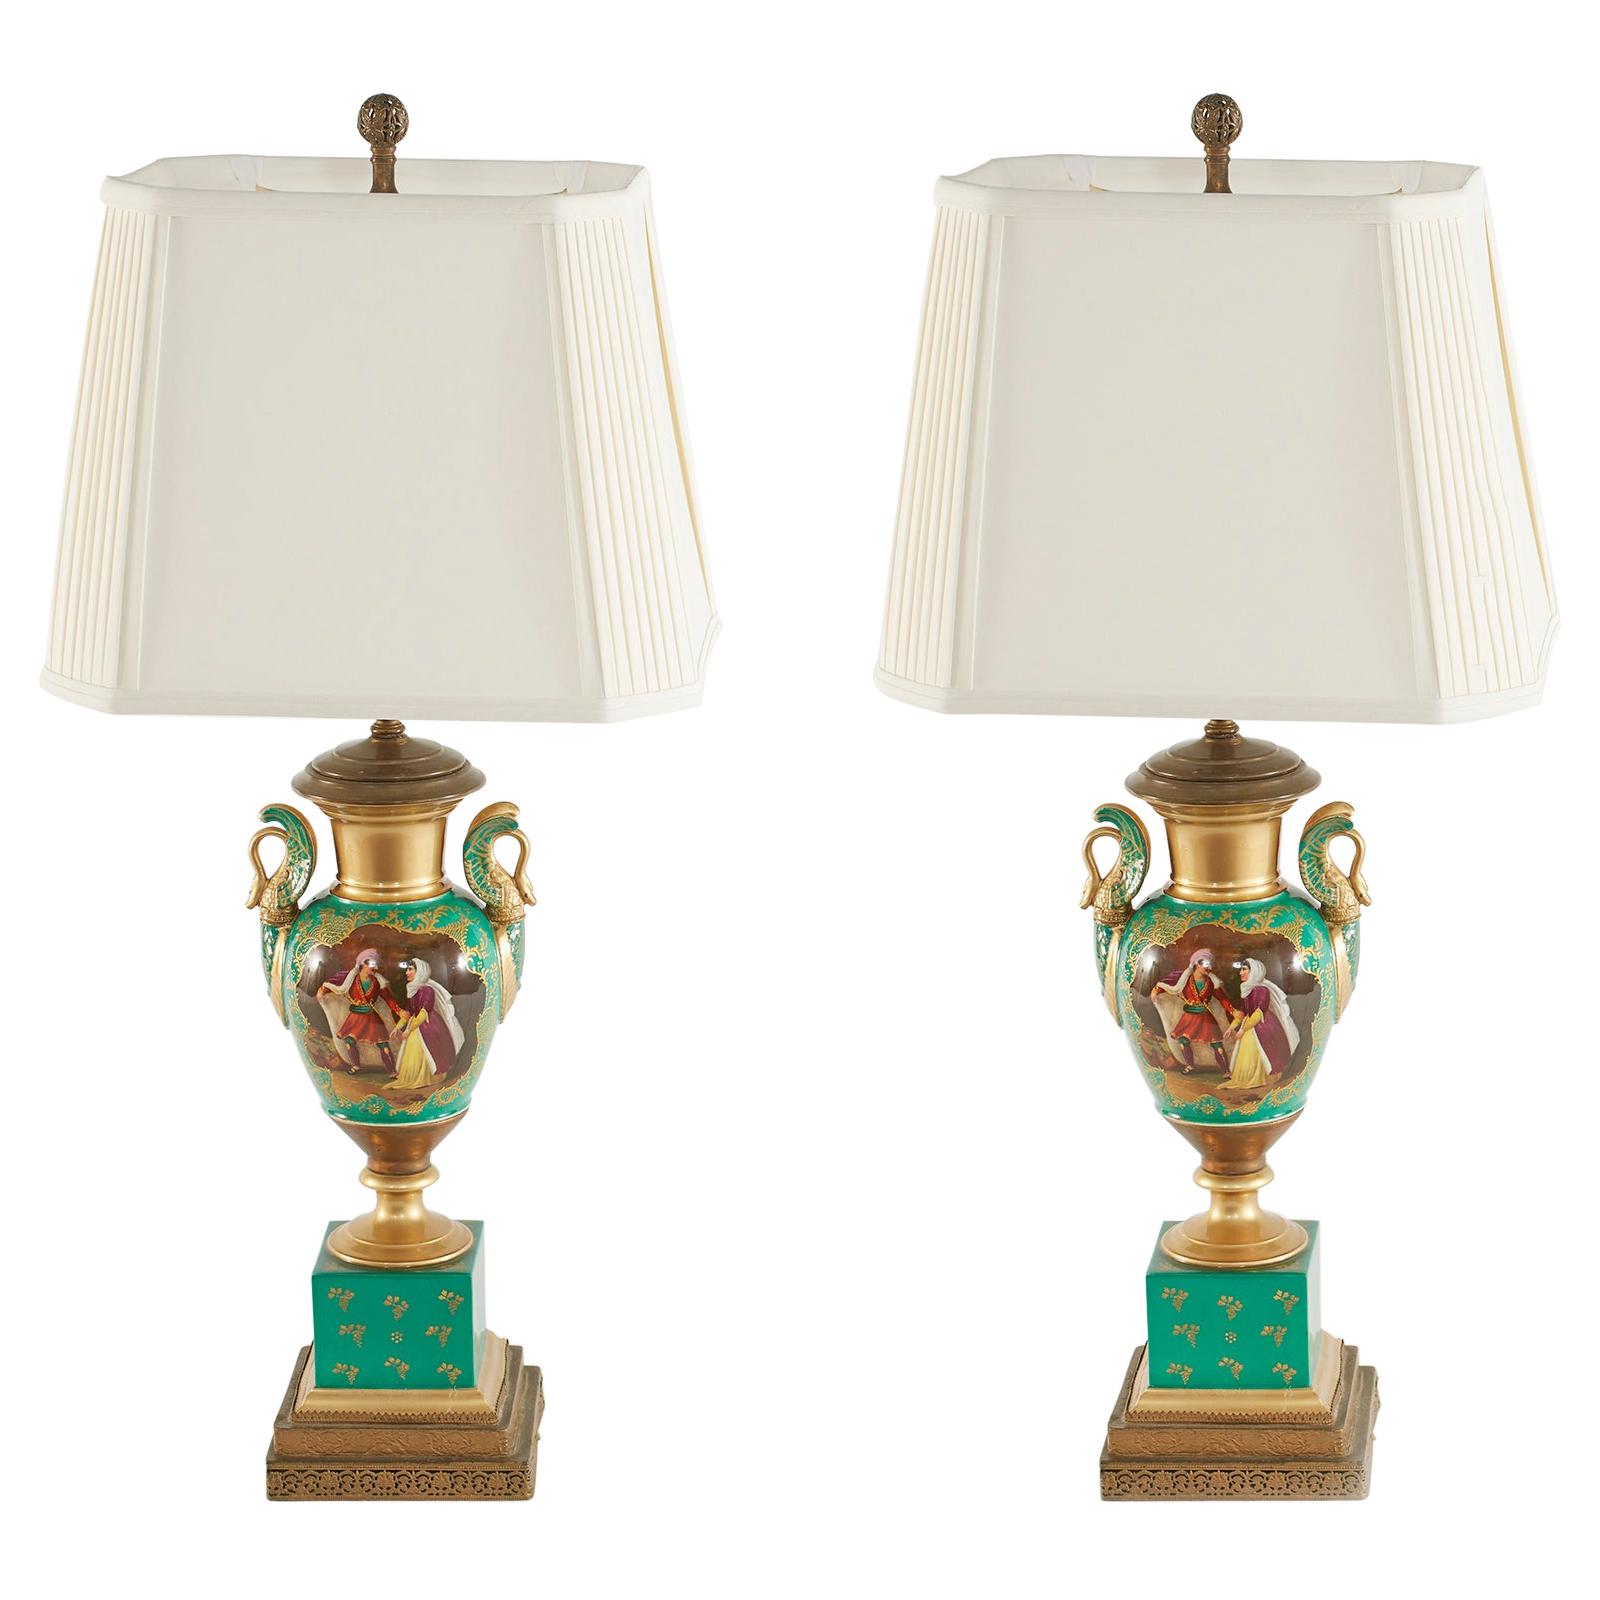 19th Century Gilt Porcelain / Brass Bass Table Lamps For Sale